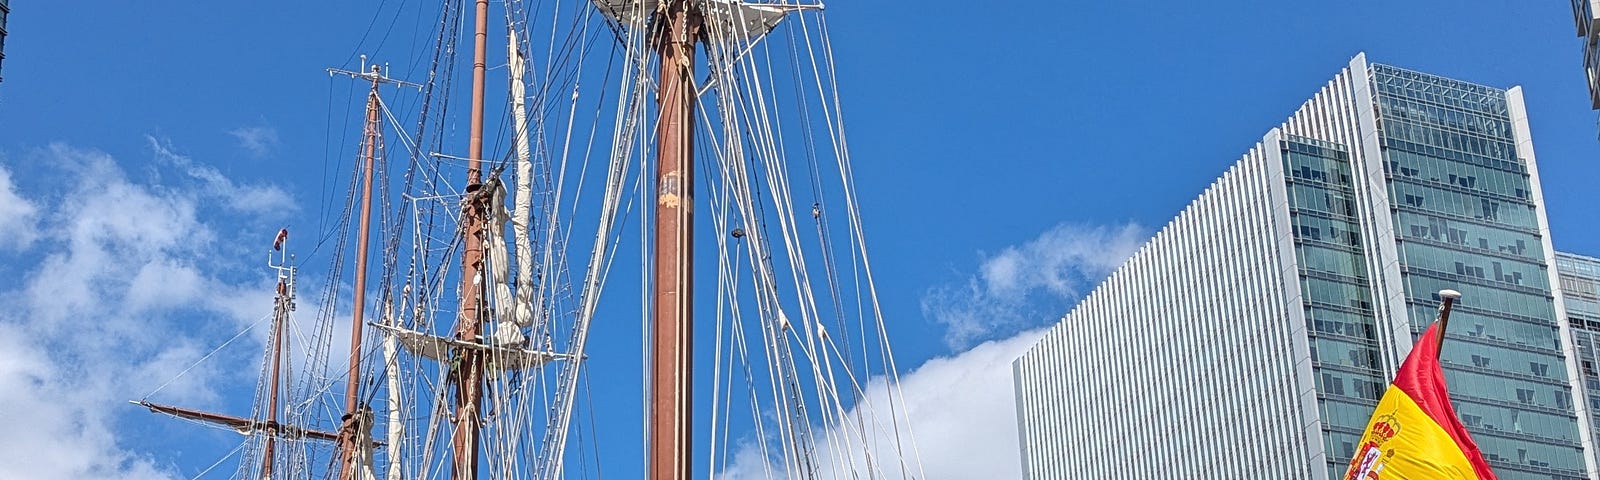 A docked 4-masted tall ship with Spanish flag at stern against a blue sky with white clouds